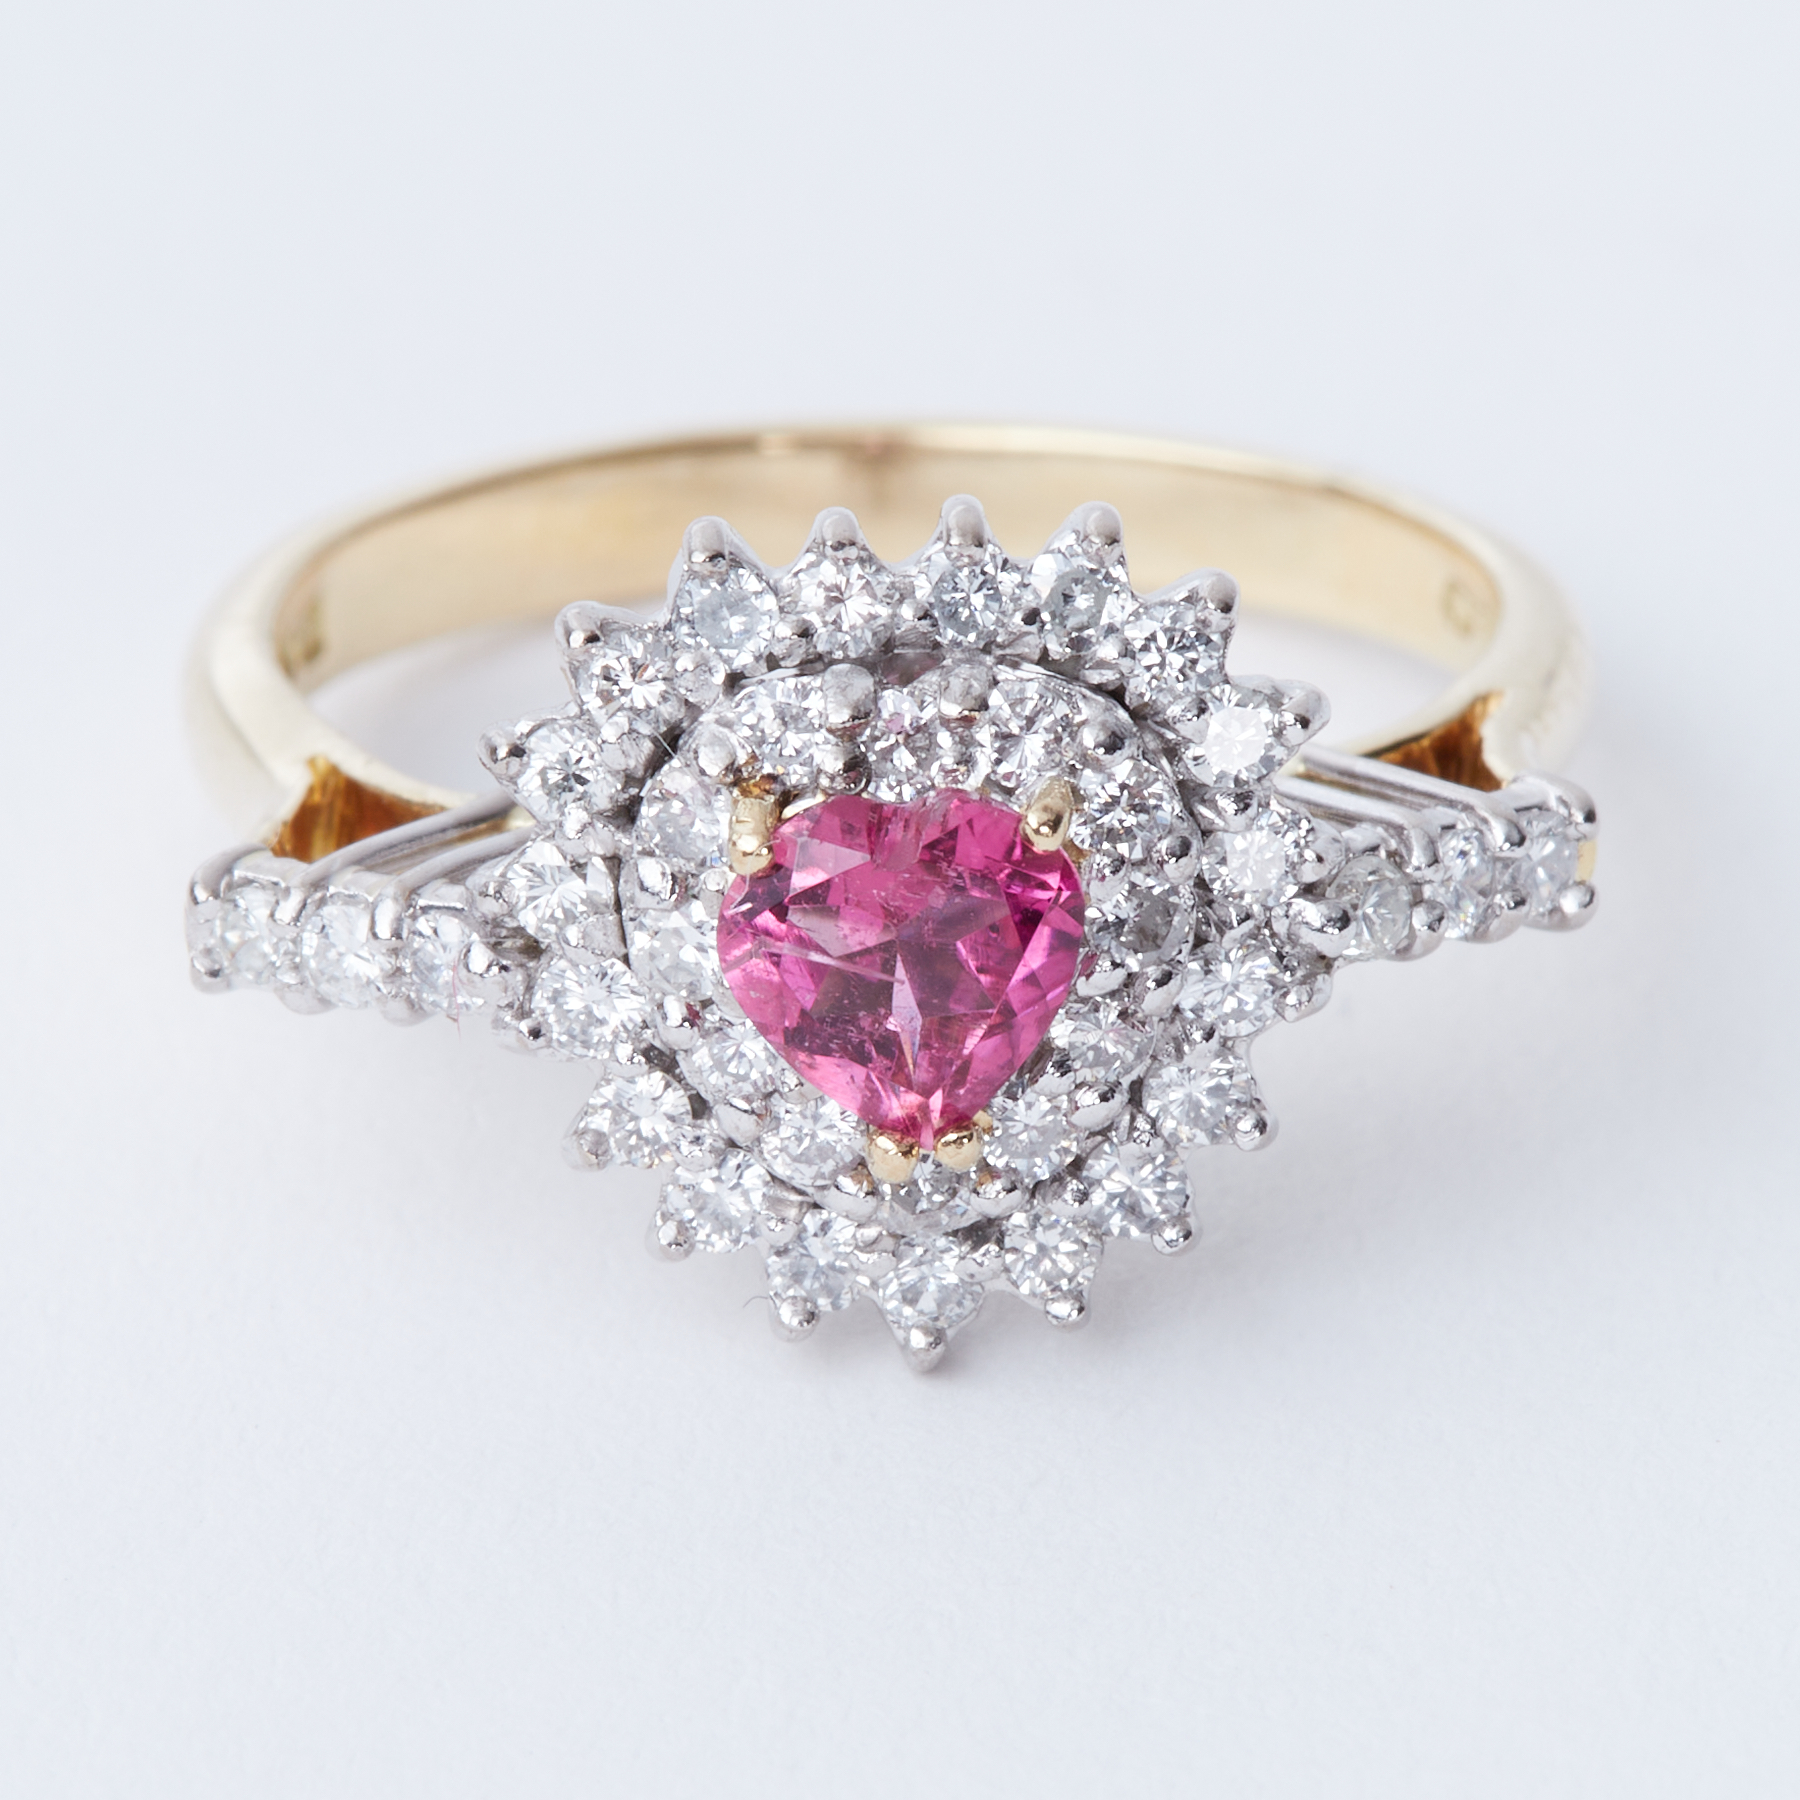 An 18ct yellow & white gold ring set with a central heart shaped pink tourmaline, approx. 0.27